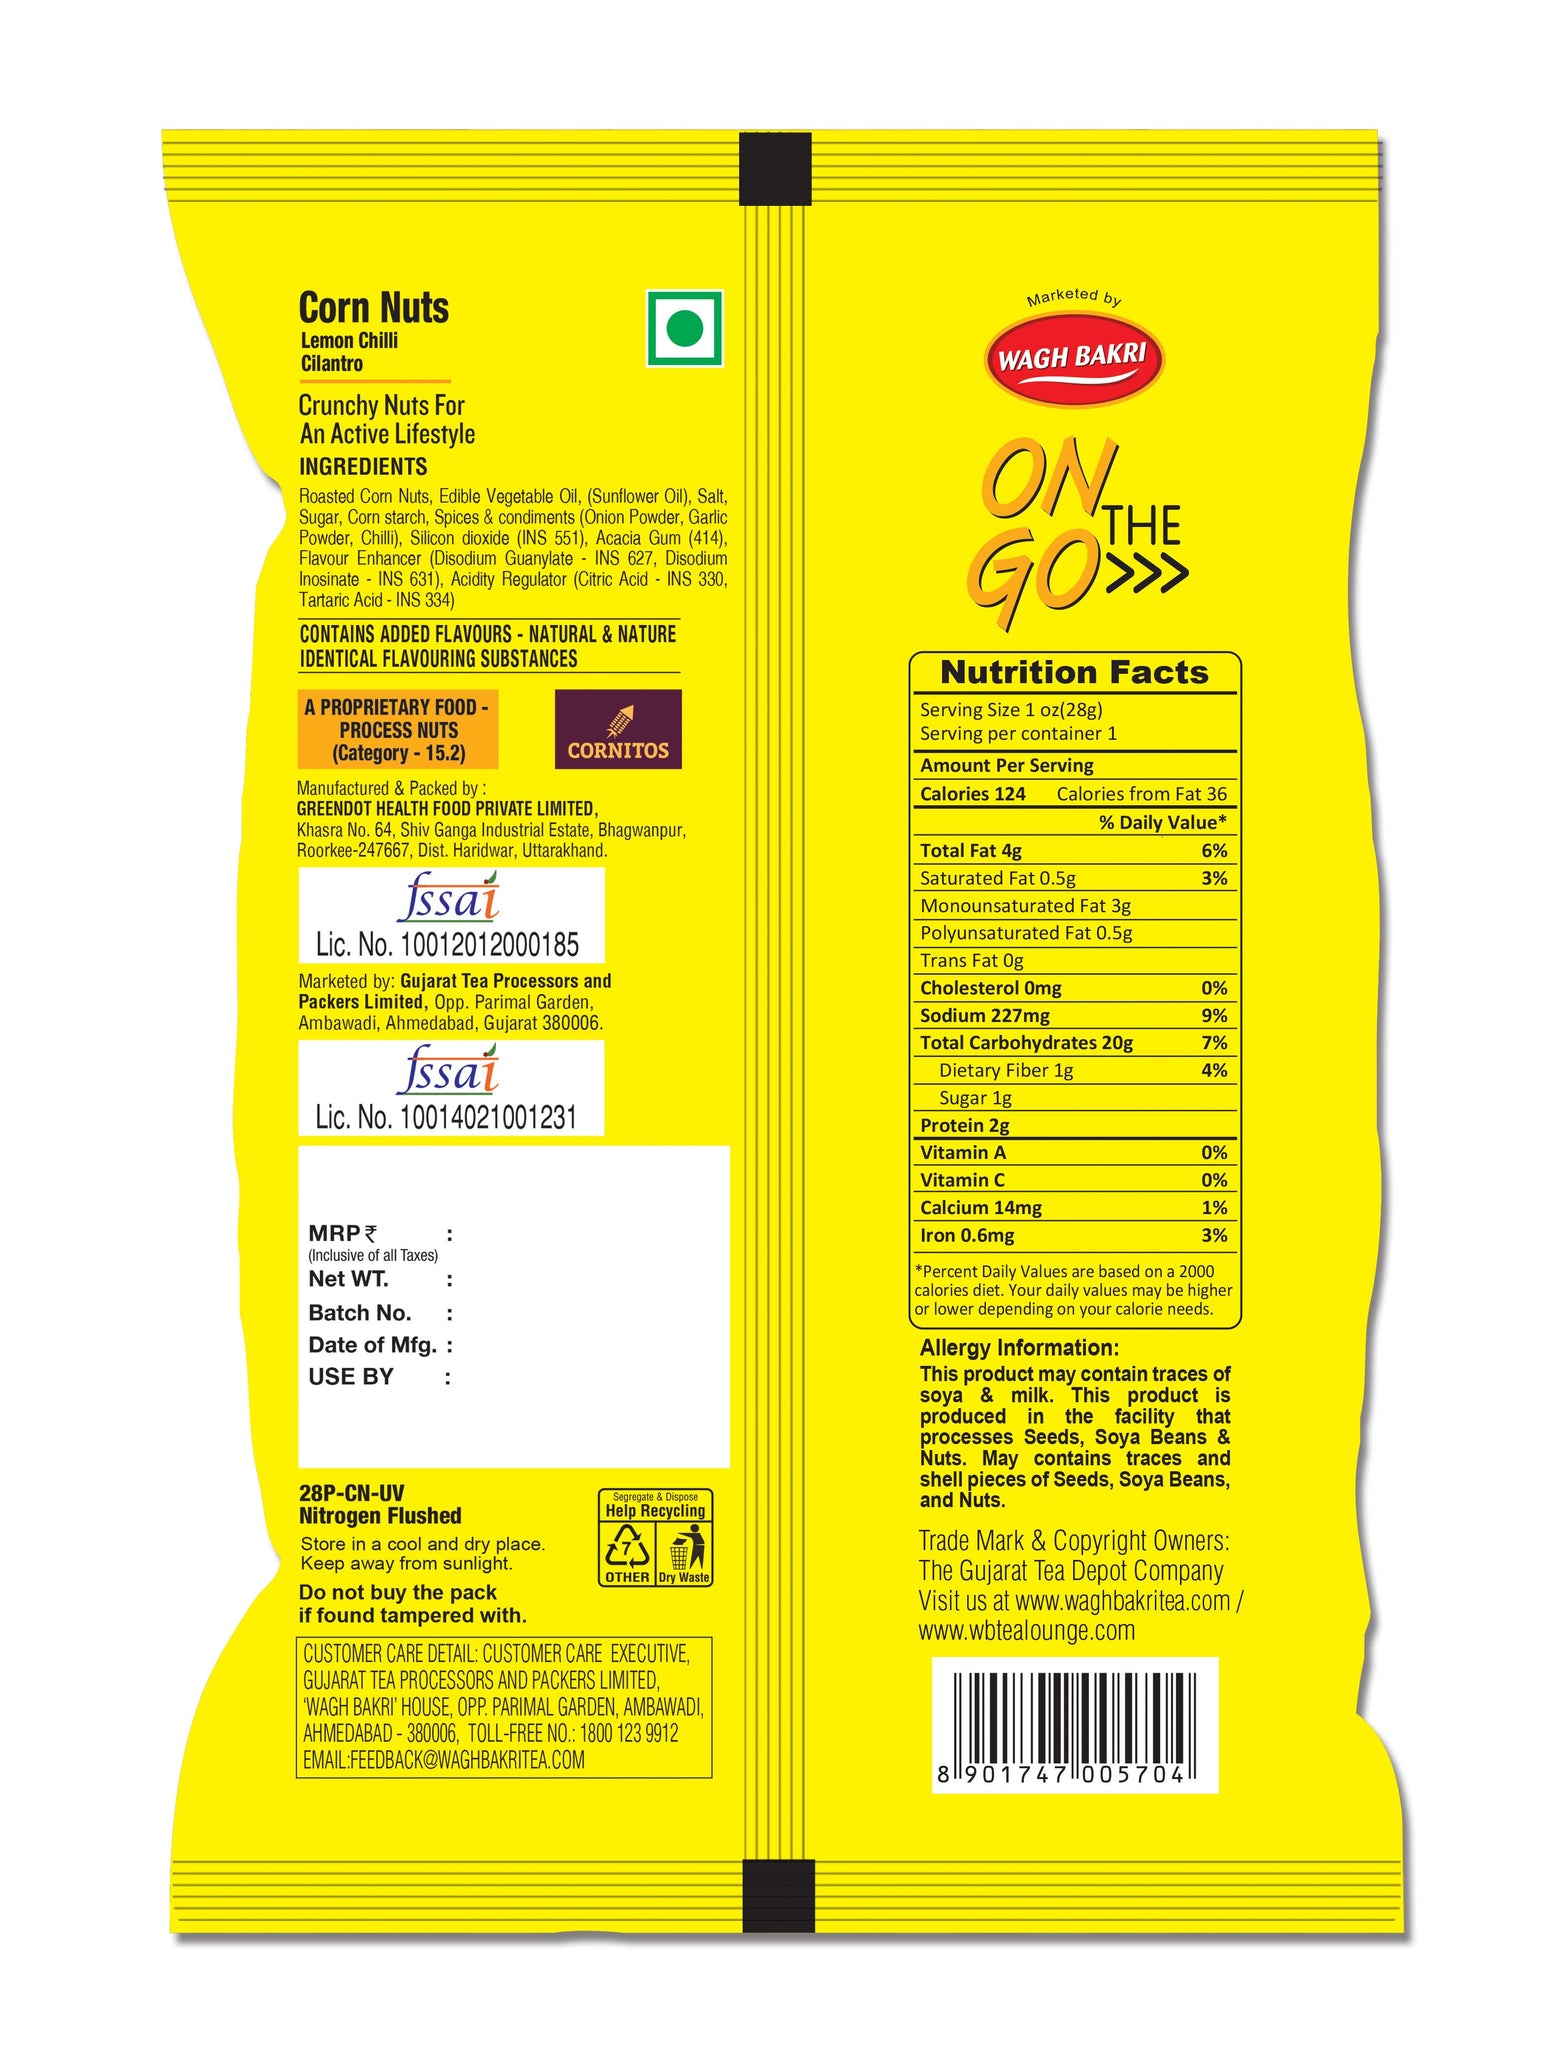 Buy On the Go Lemon Chilli Cilantro Corn Nuts Pack of 6 Combo